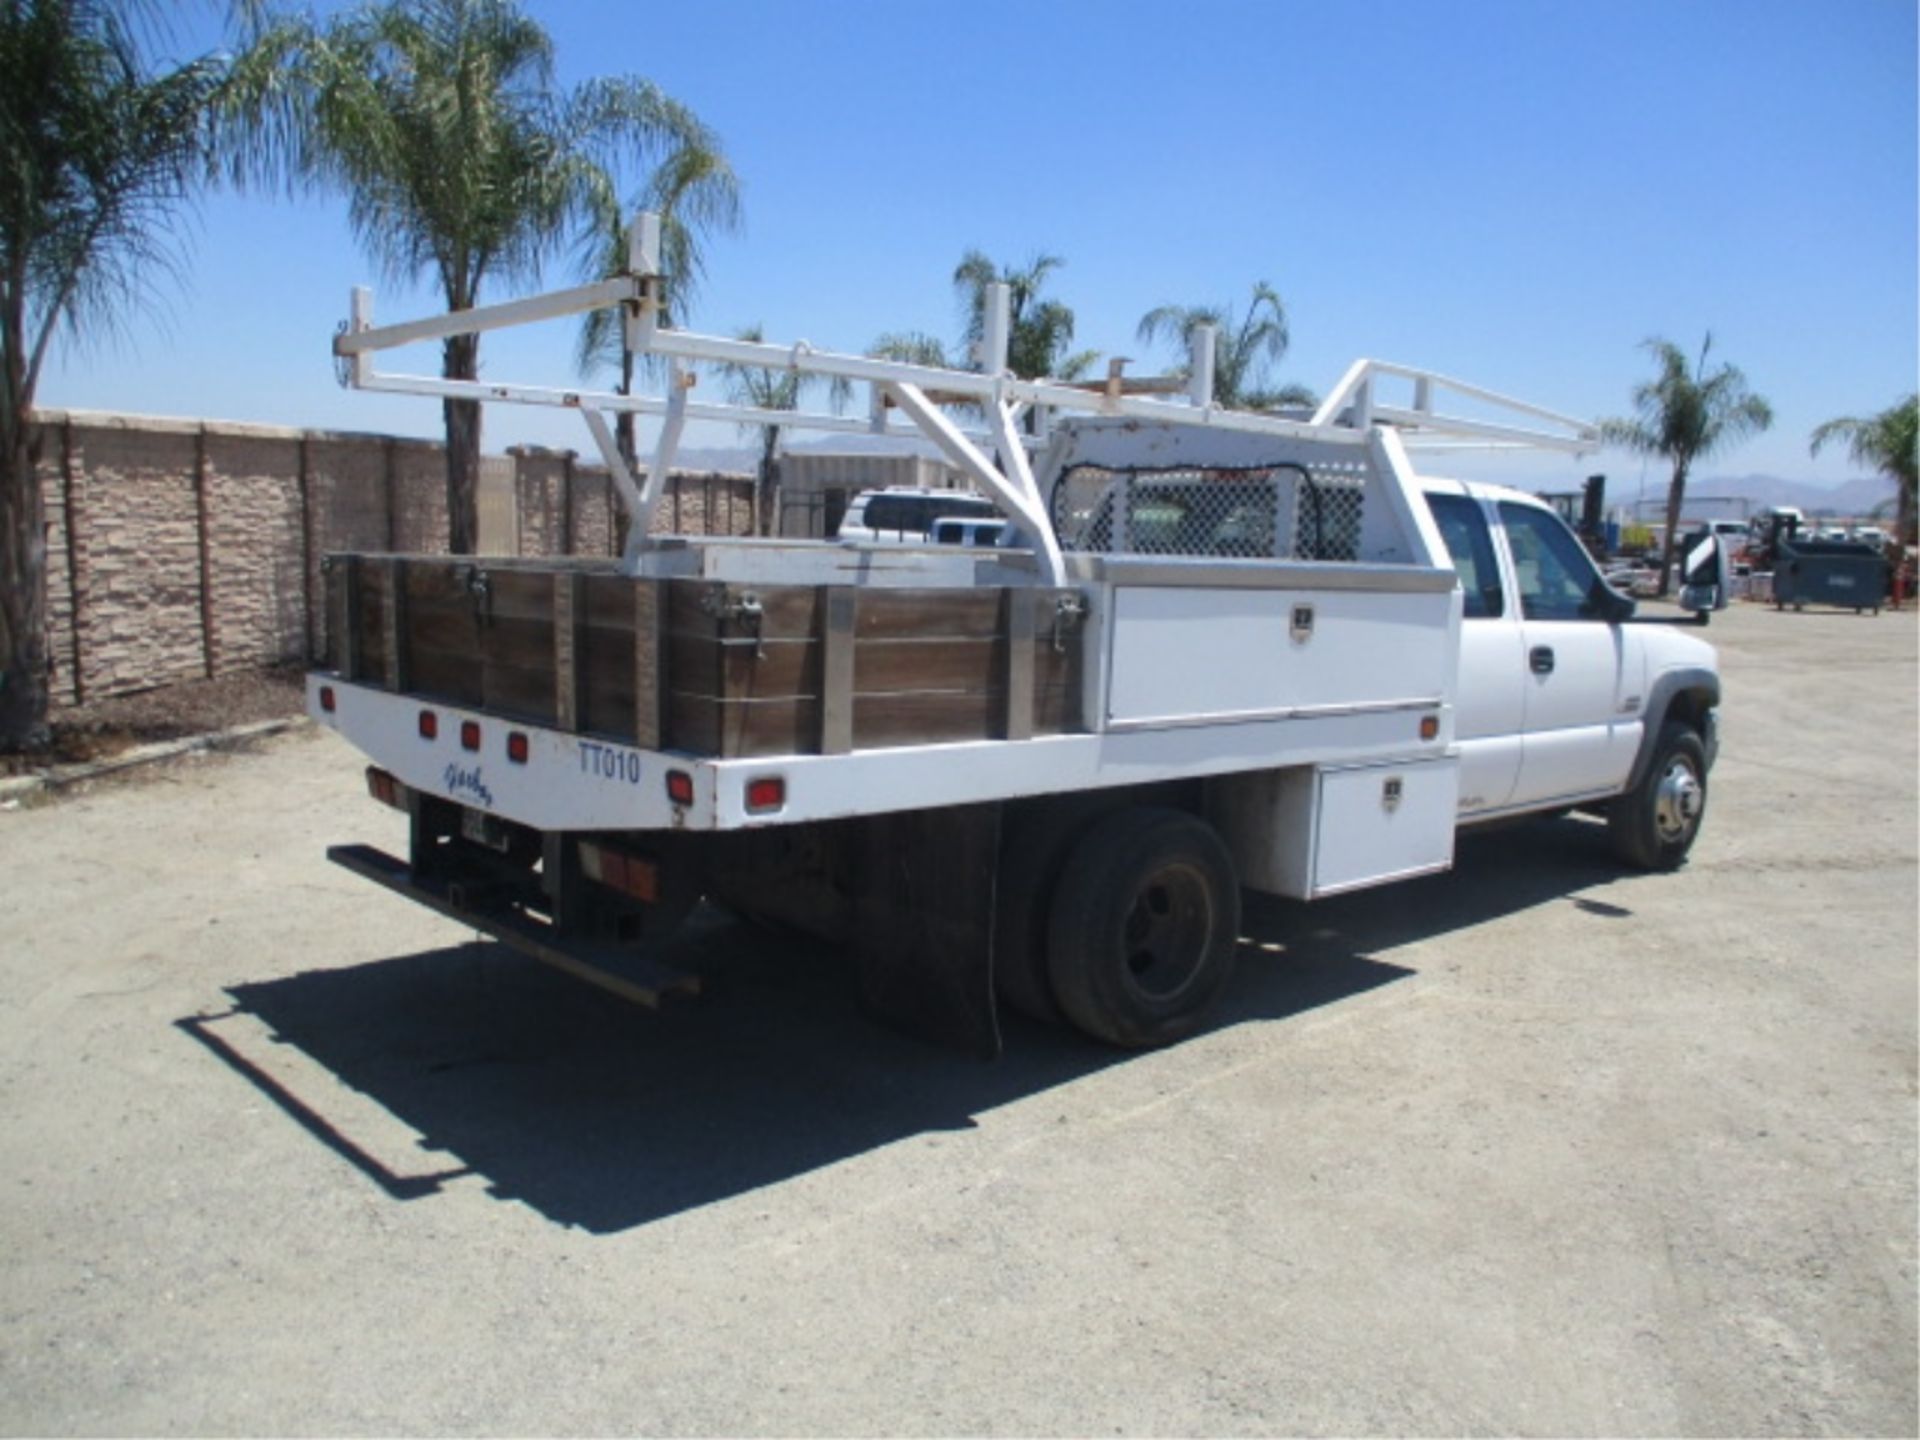 2006 Chevrolet 3500 Extended-Cab Utility Truck, 6.6L Turbo Diesel, Automatic, Tool Boxes, Lumber - Image 18 of 71